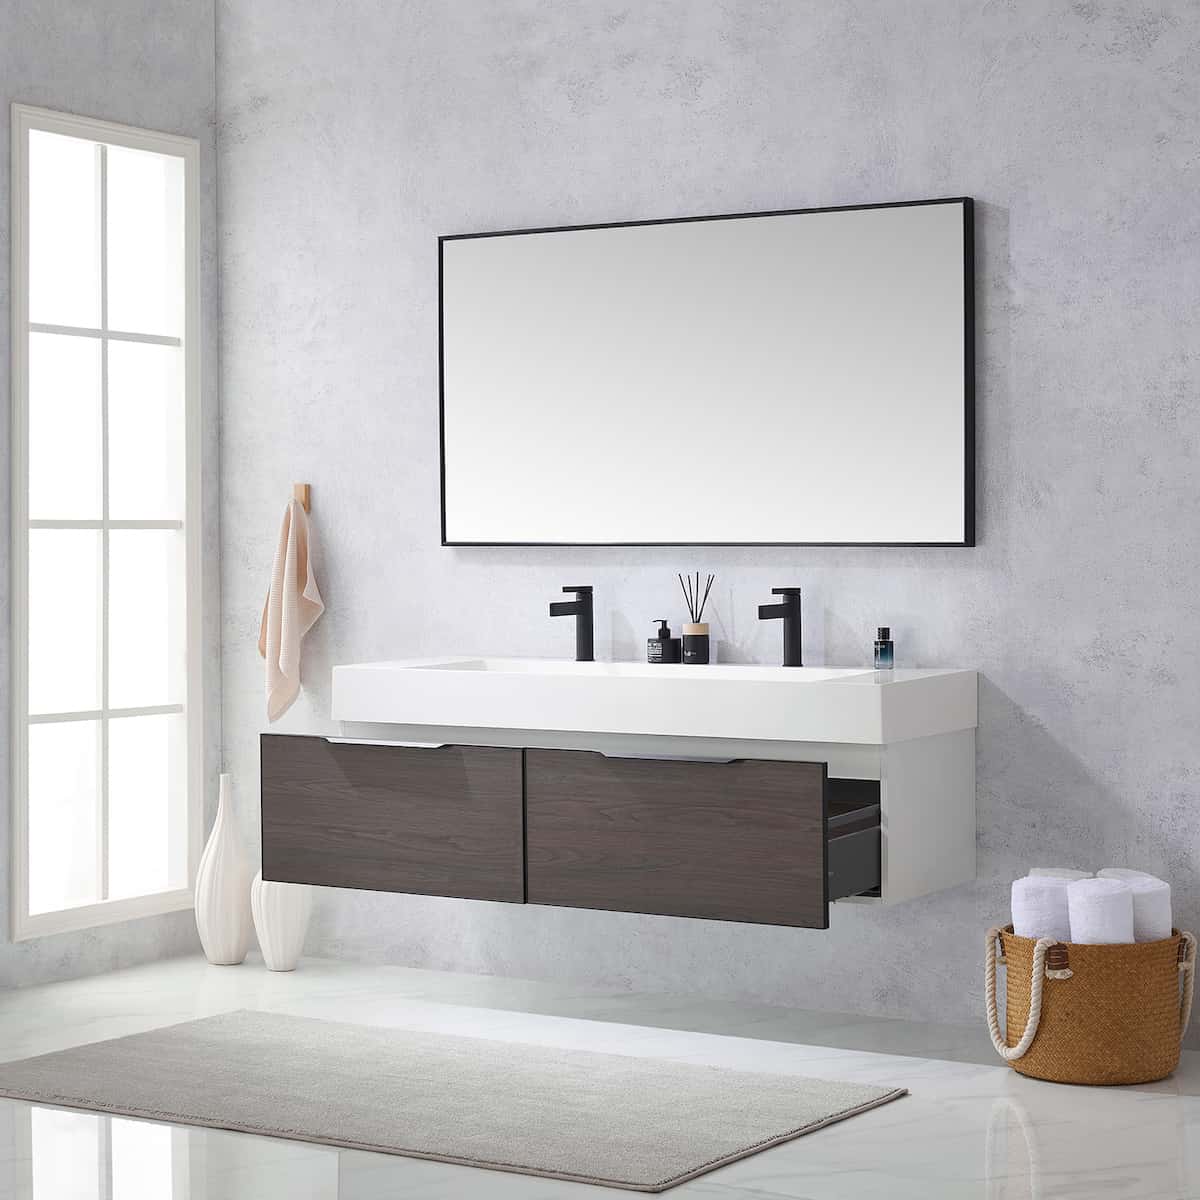 Vinnova Vegadeo Wall Mount Double Sink Bath Vanity with White One-Piece Composite Stone Sink Top 7034-WH